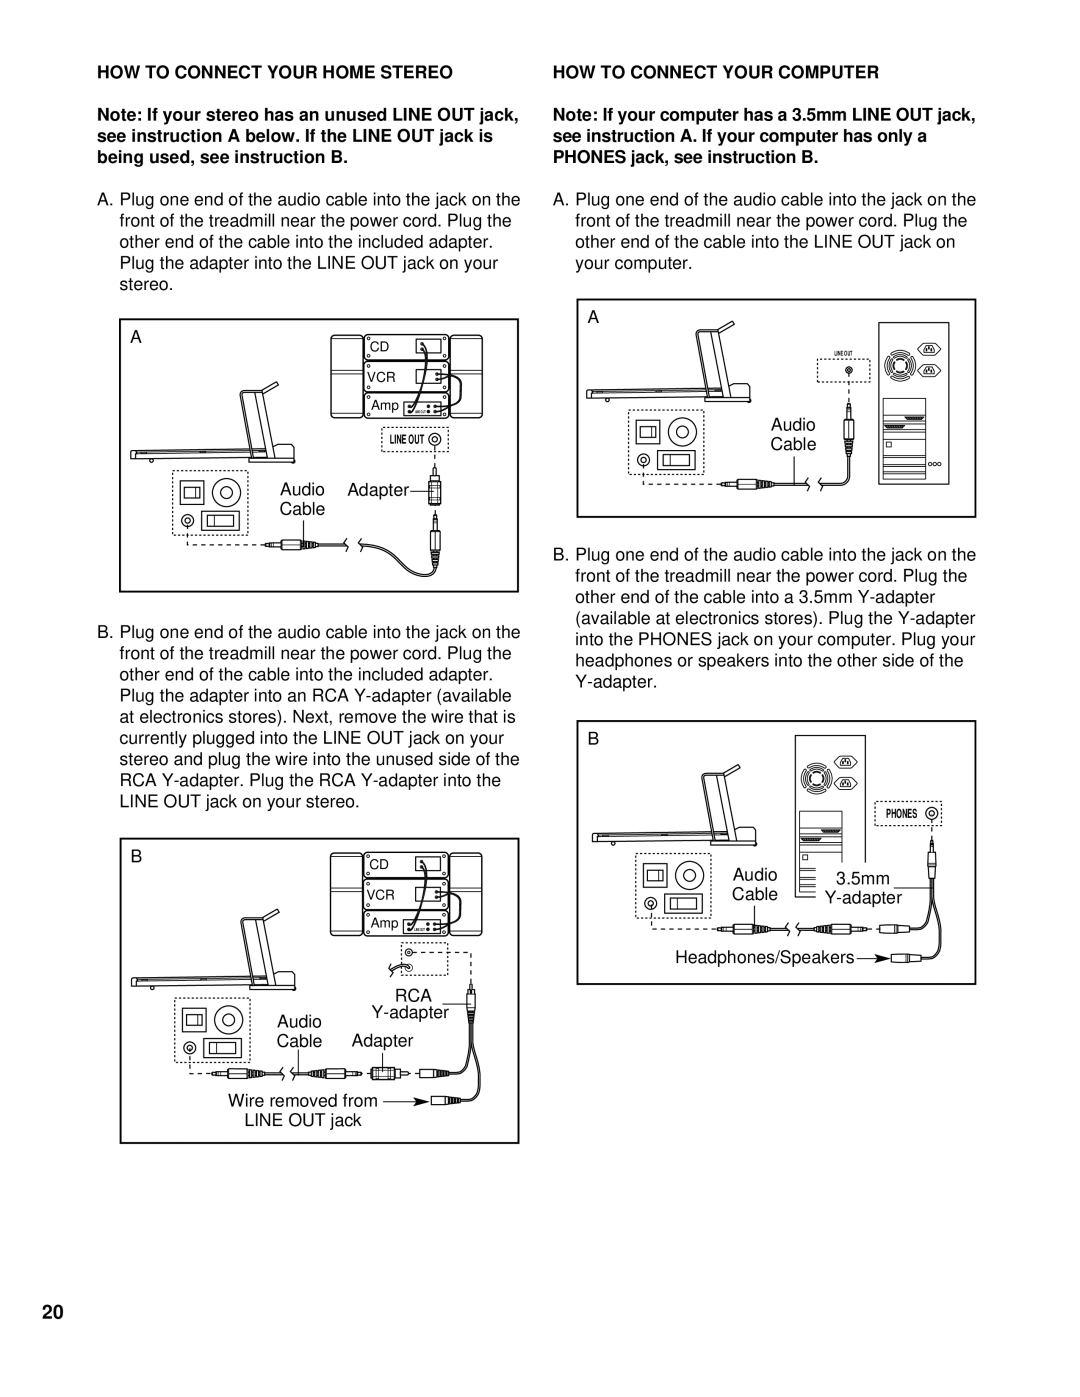 NordicTrack NCTL11991 user manual HOW to Connect Your Home Stereo, Plug the adapter into the Line OUT jack on your stereo 